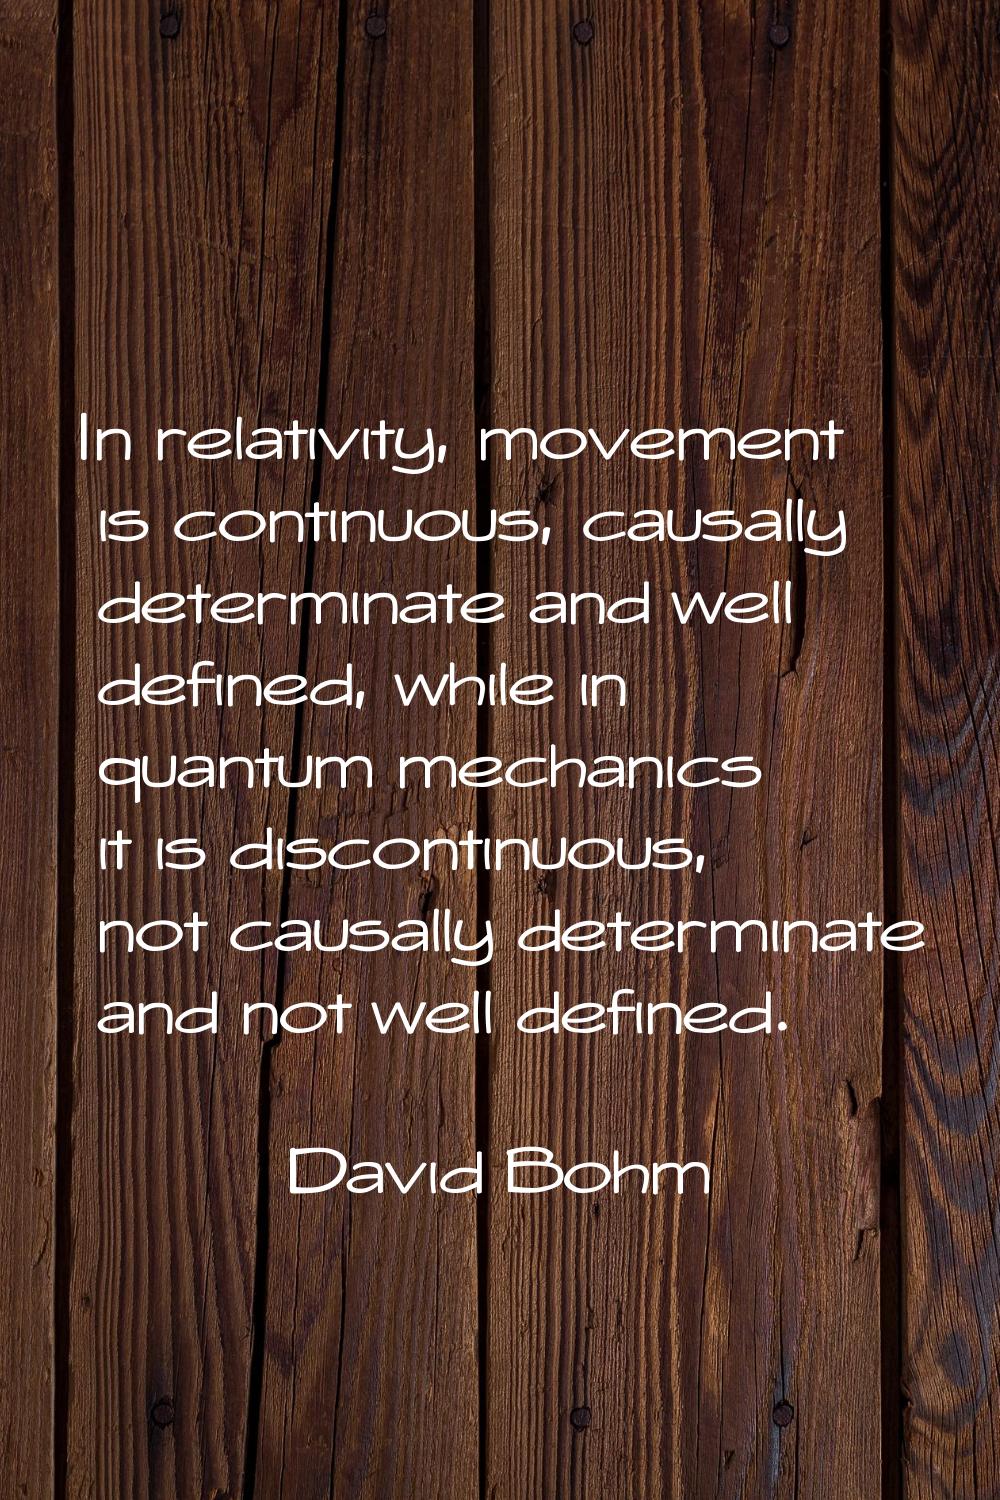 In relativity, movement is continuous, causally determinate and well defined, while in quantum mech